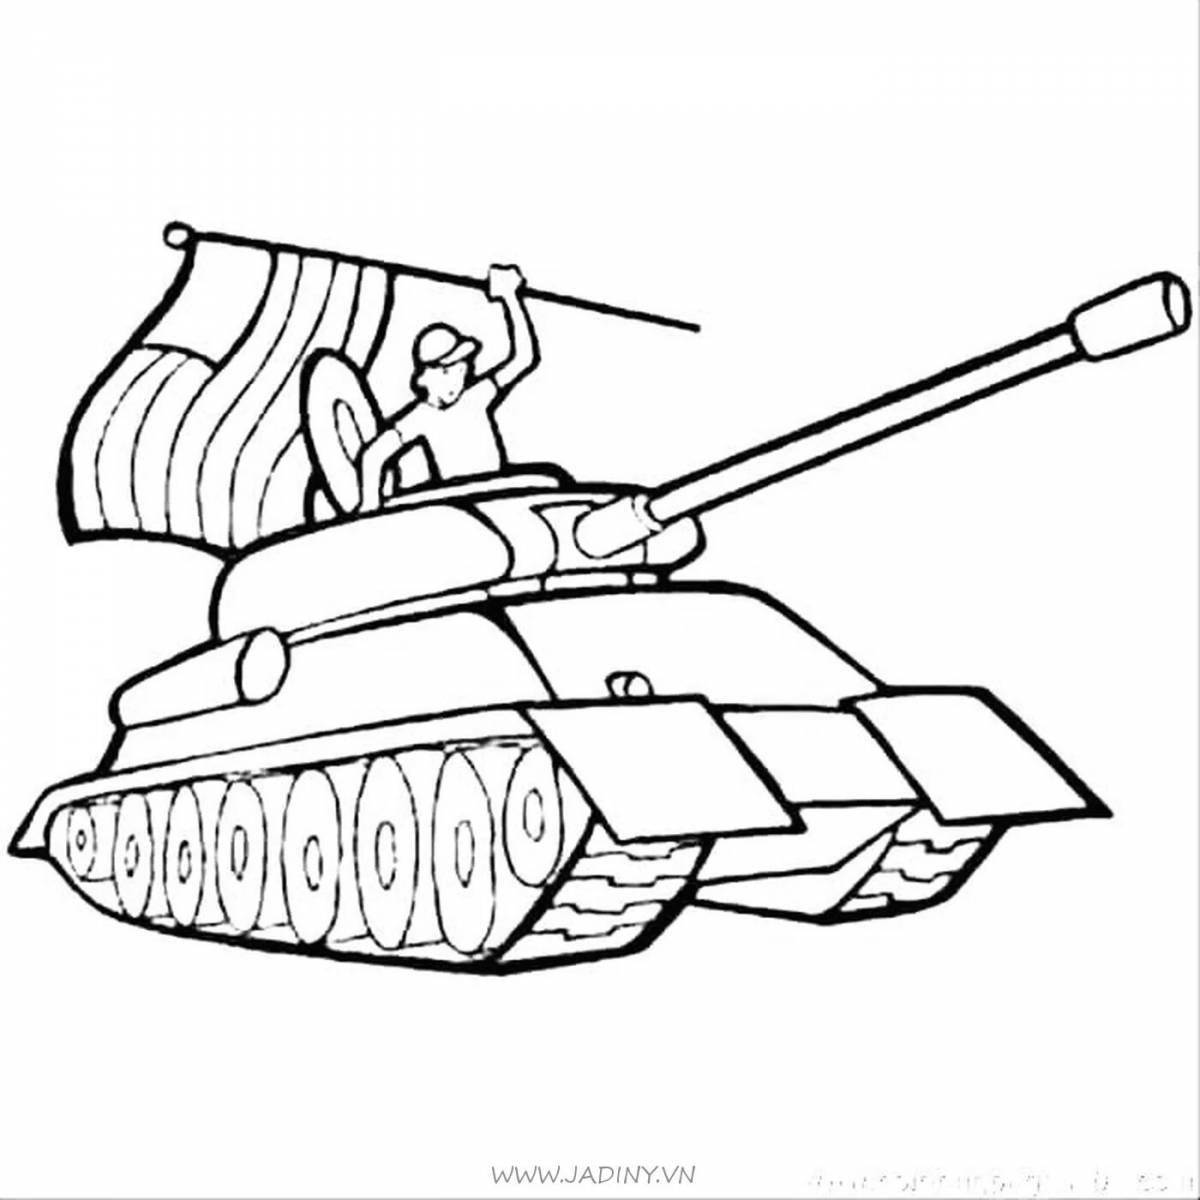 Fabulous soldiers and tanks coloring for kids